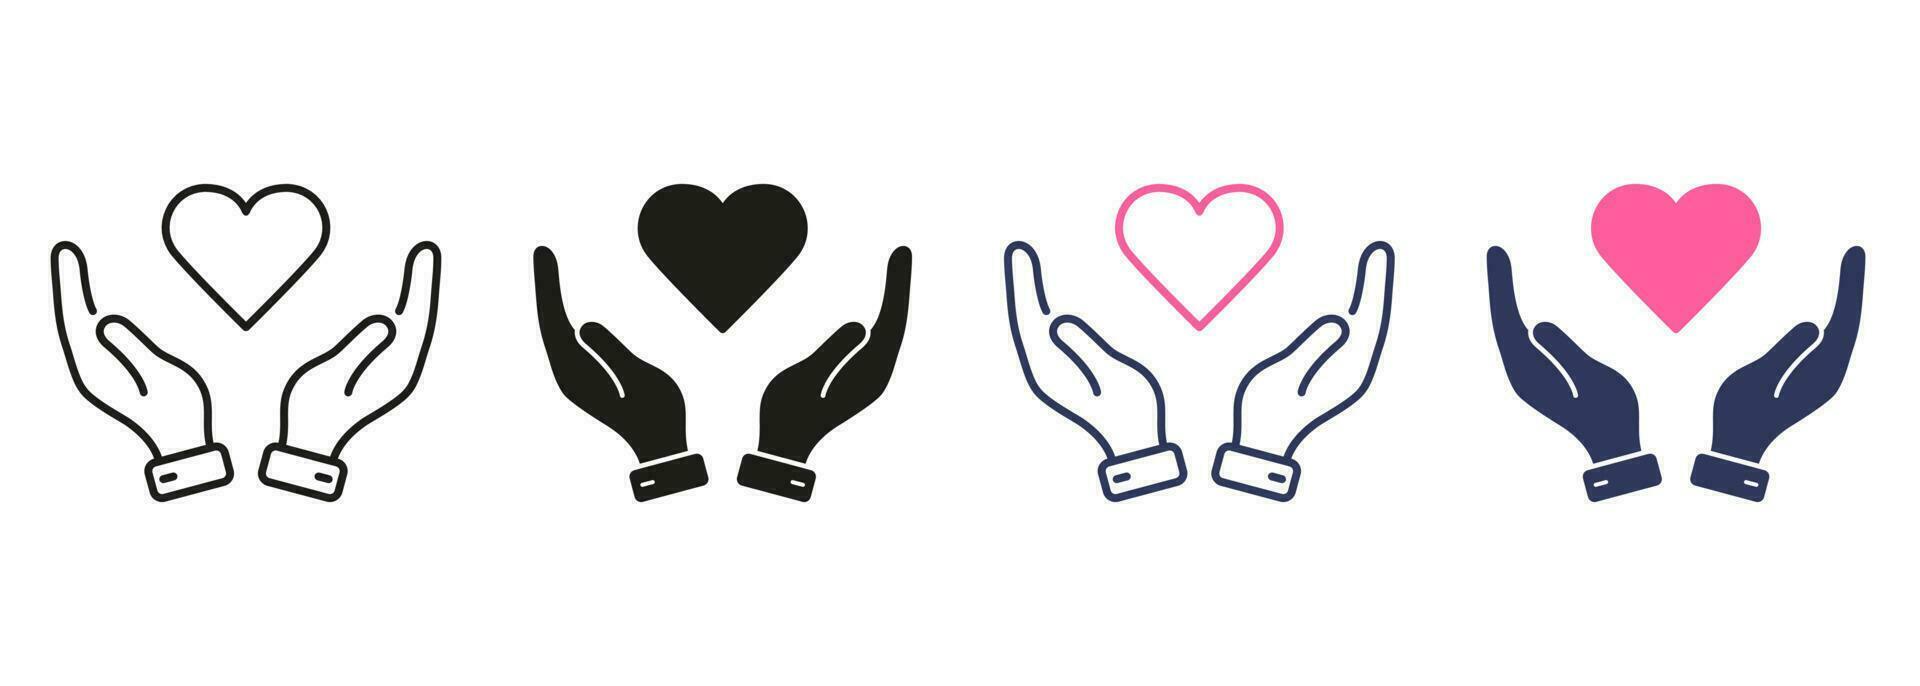 Peace Friendship, Emotional Support Symbol Collection. Love, Health, Charity, Care, Help Line and Silhouette Color Icon Set. Human Hand and Heart Shape Pictogram. Isolated Vector Illustration.